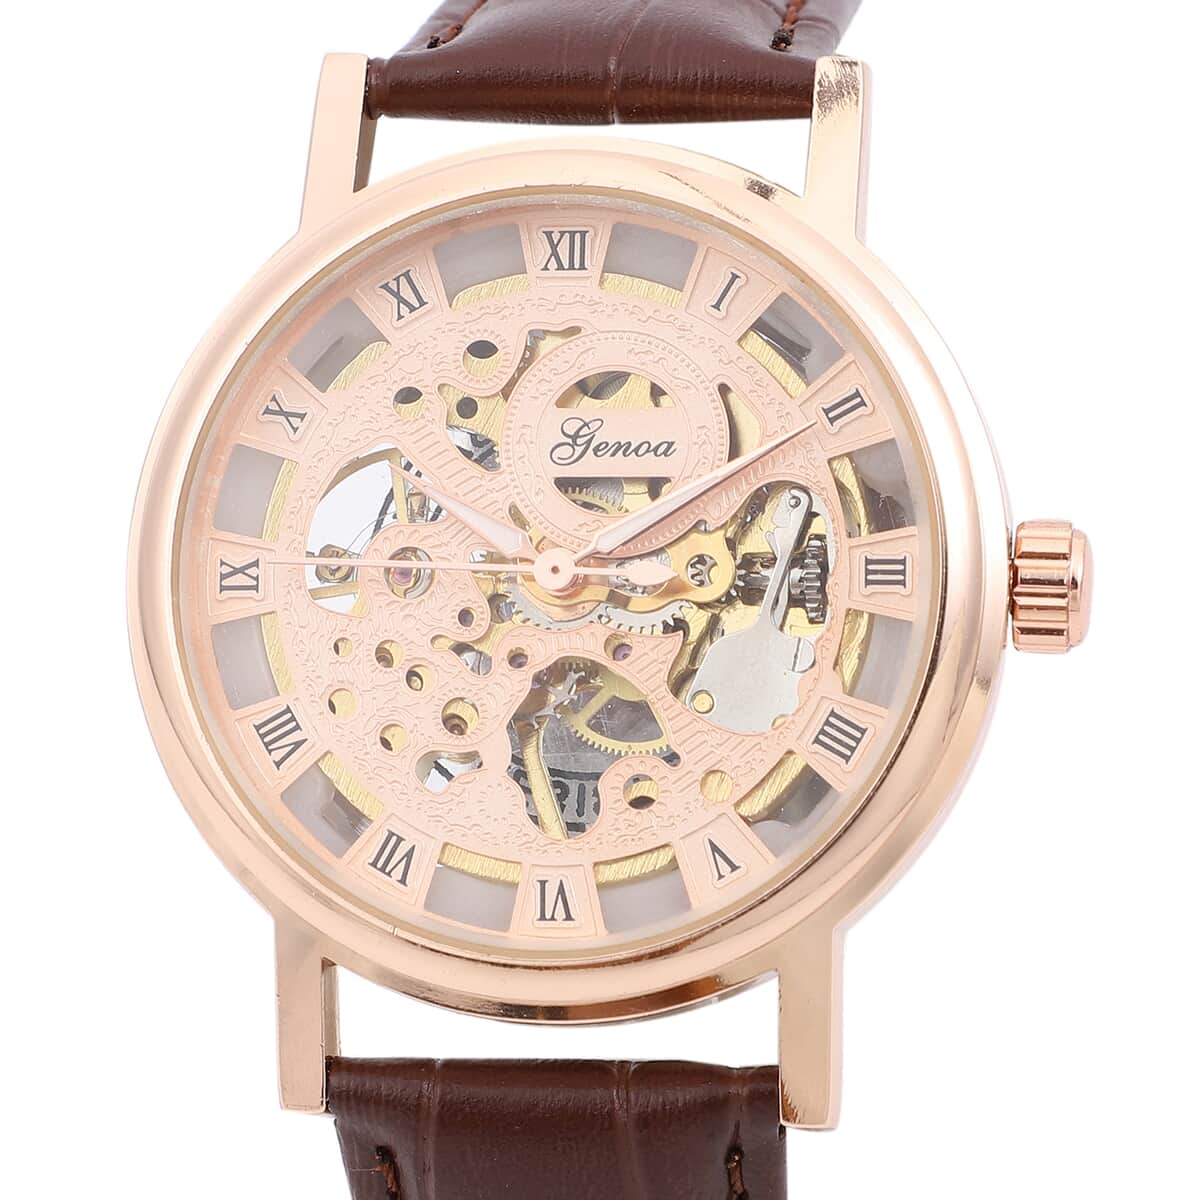 Genoa Automatic Mechanical Movement Hollowed Out Watch in Rosetone with Brown Leather Band image number 3